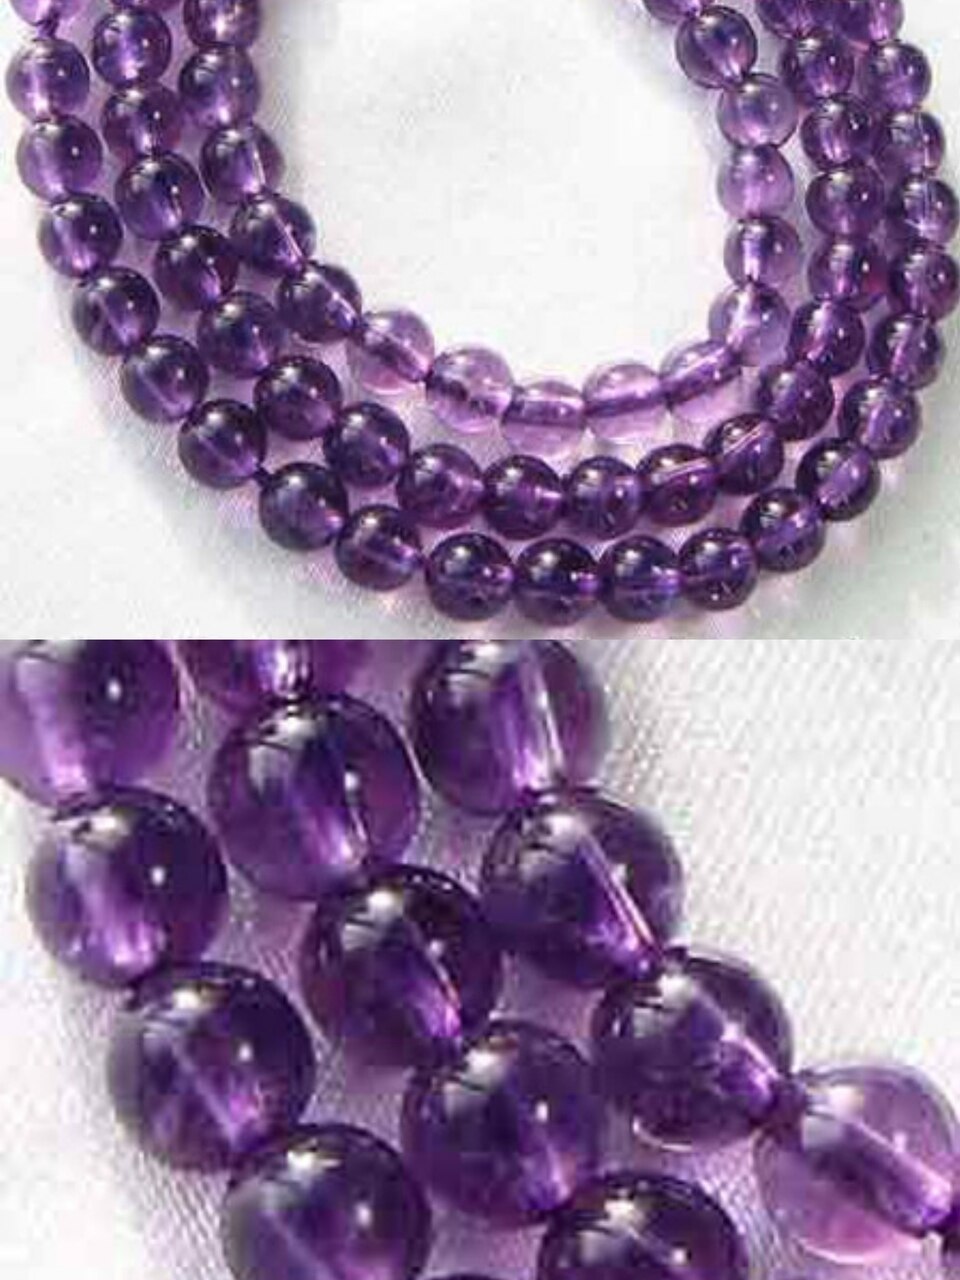 Royal Natural 4mm Amethyst Round Bead 8 inch Strand 9390HS - PremiumBead Primary Image 1